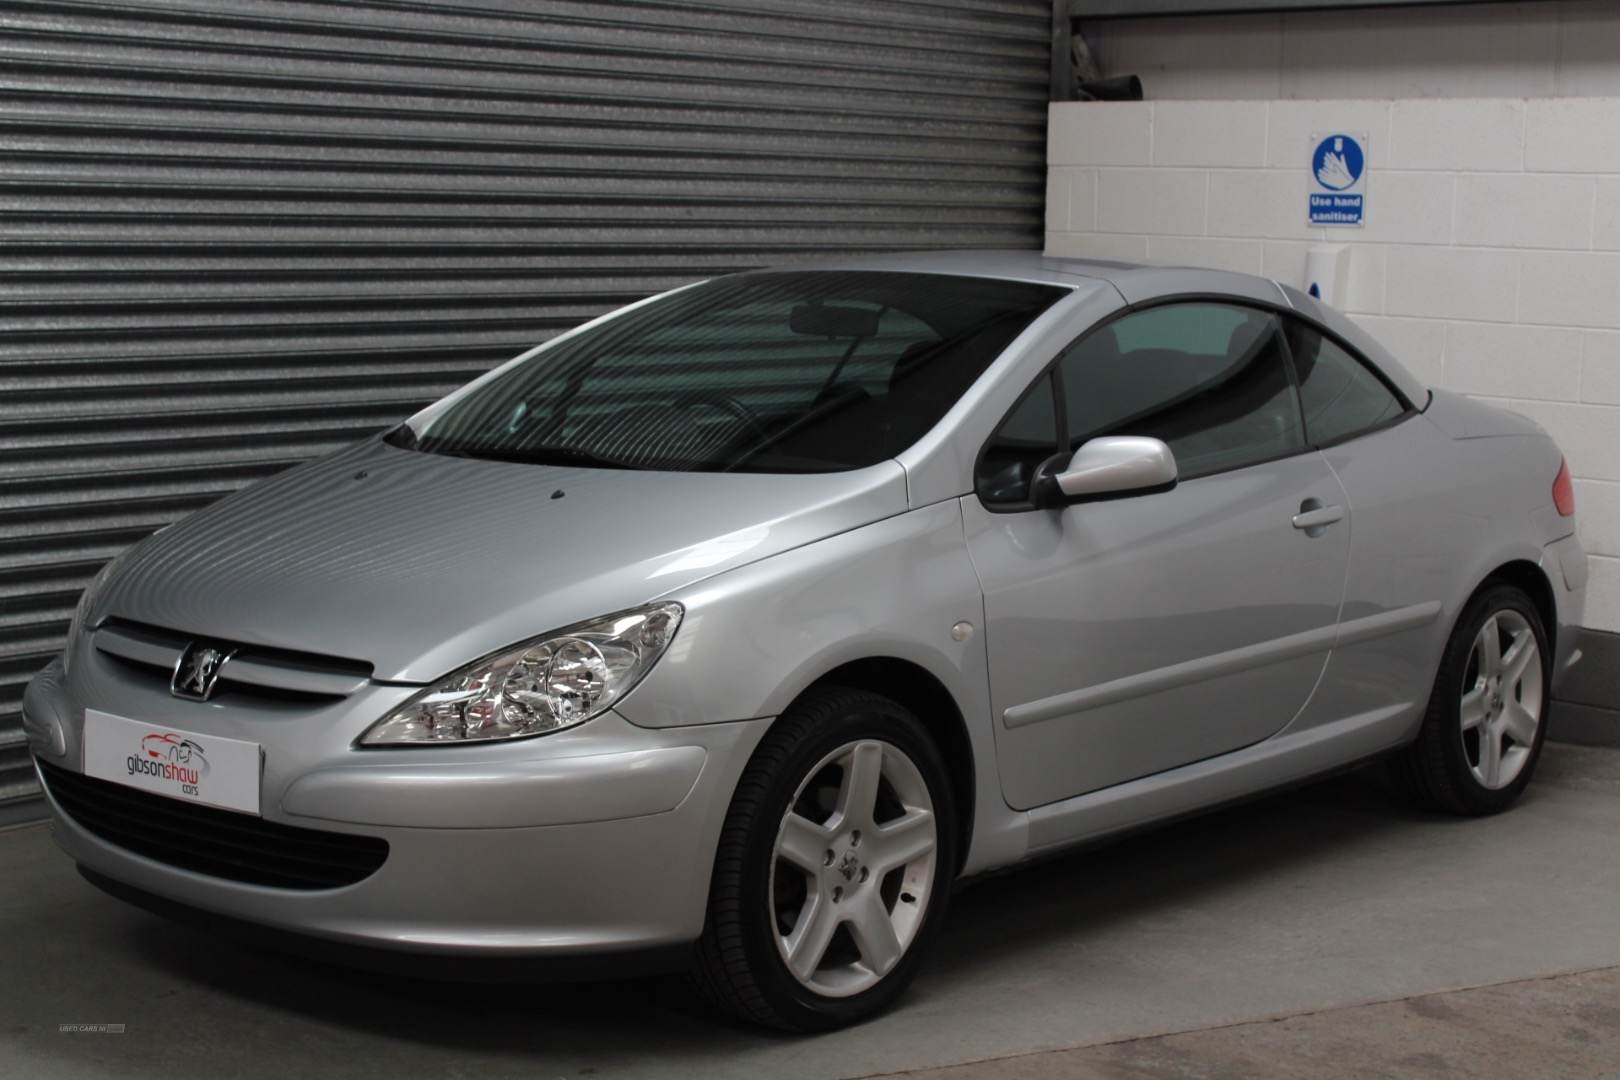 Used Peugeot 307 SW (2002 - 2007) Review